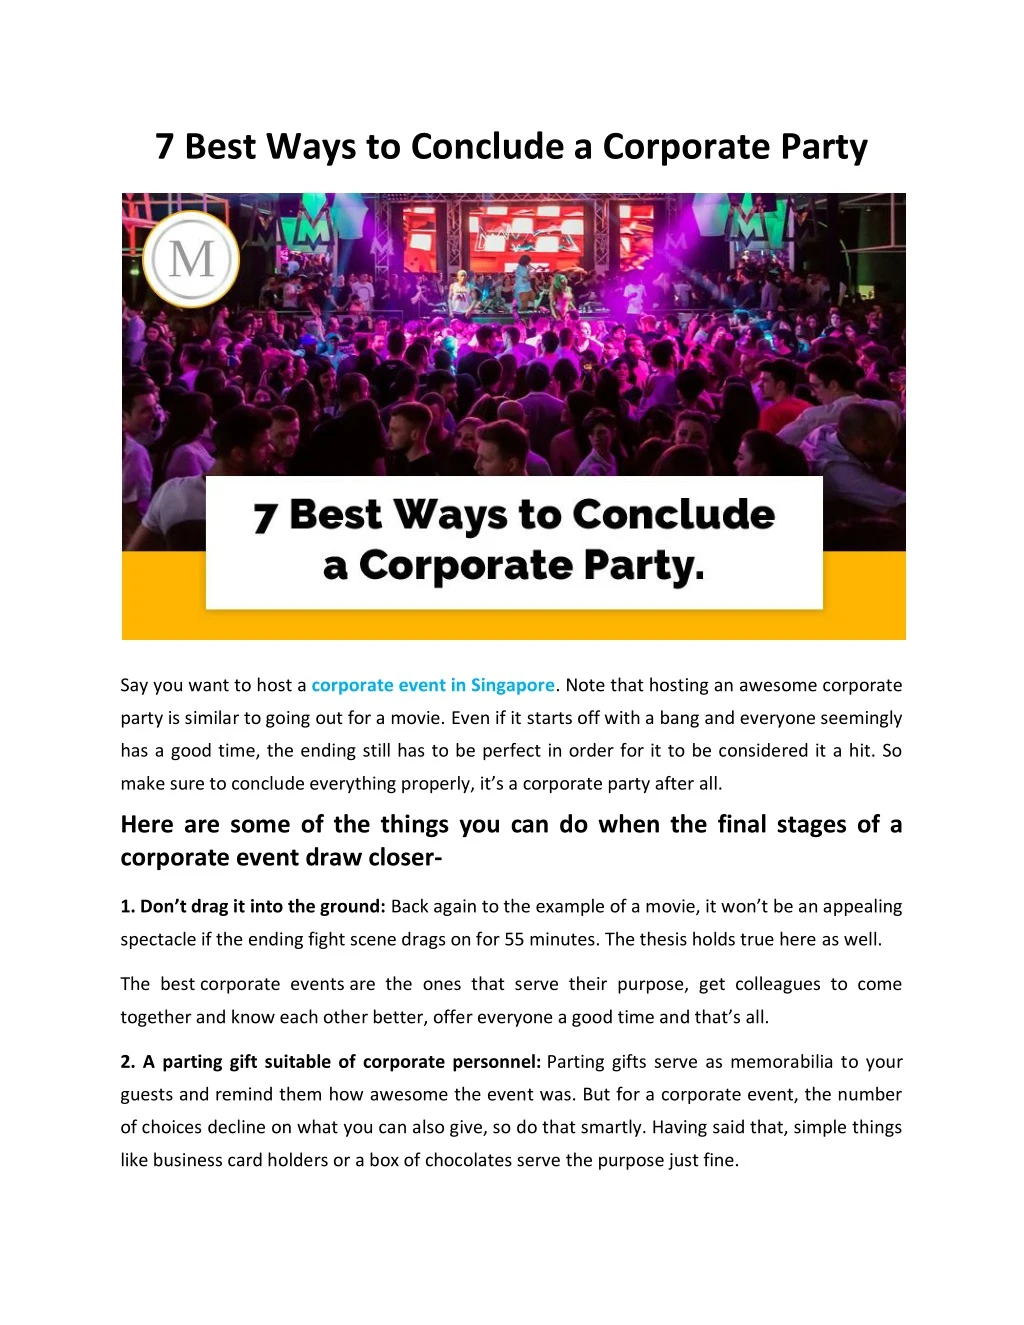 7 best ways to conclude a corporate party